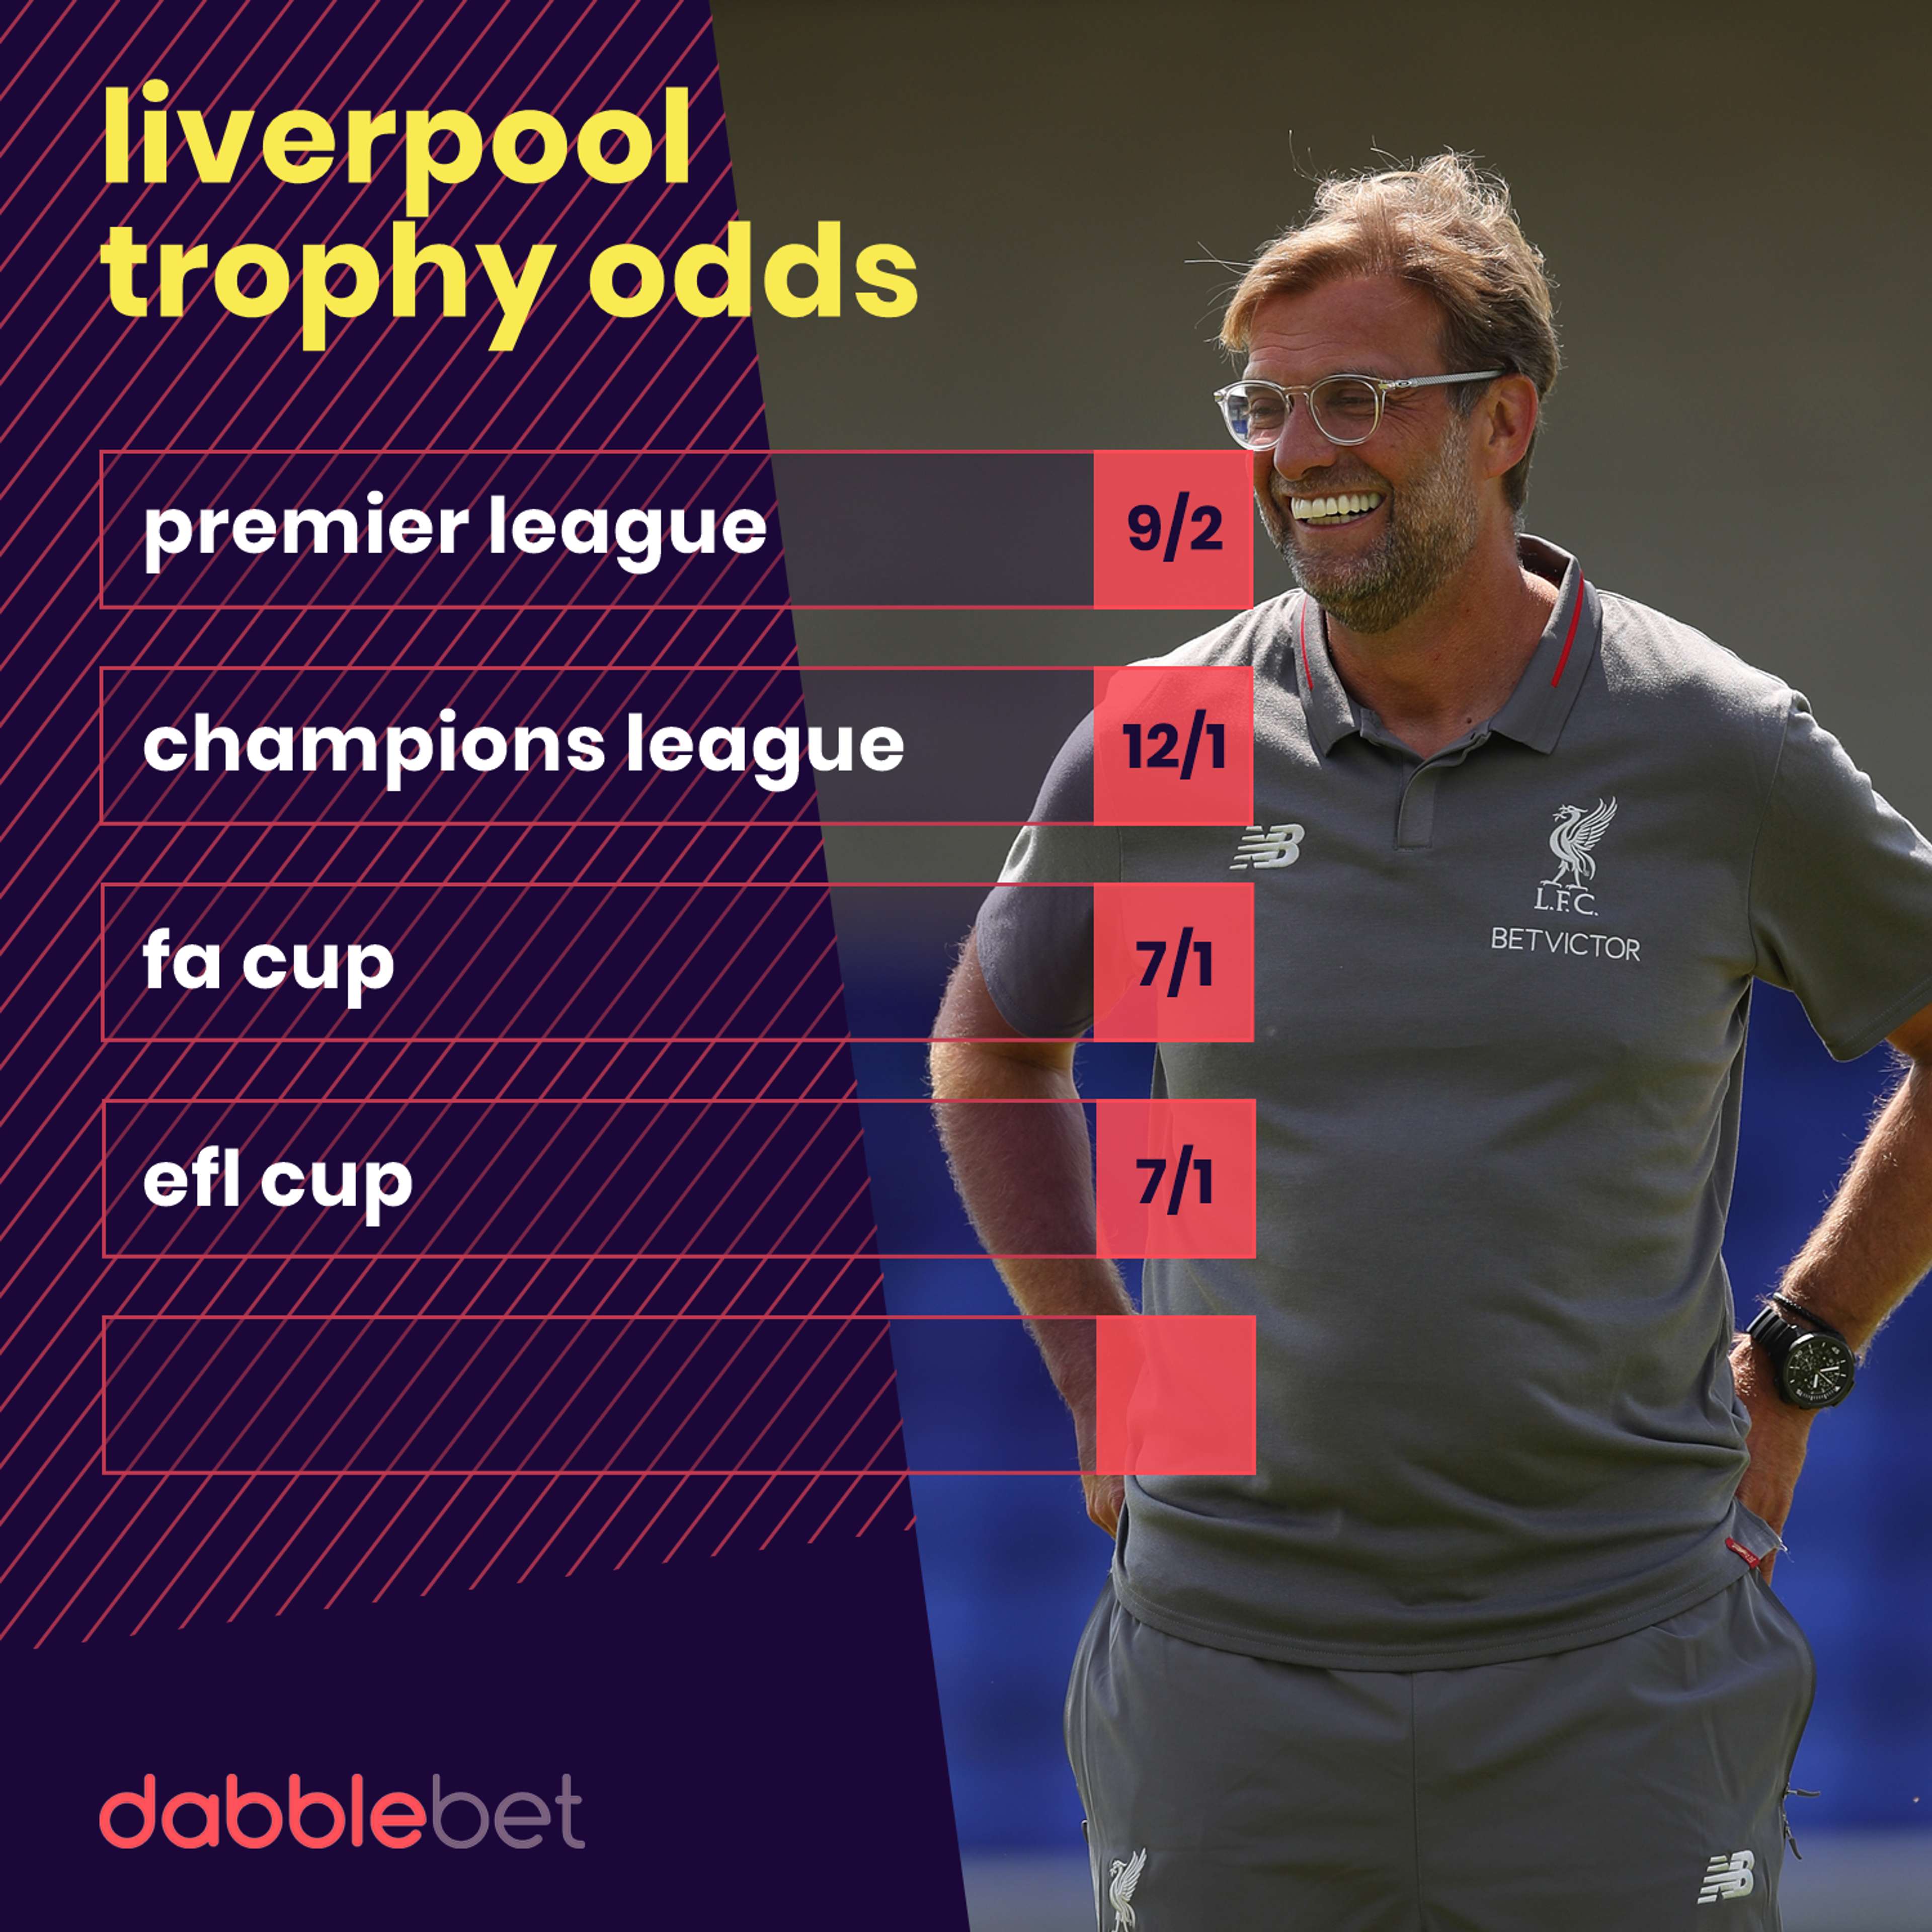 Liverpool trophy odds 1907 graphic